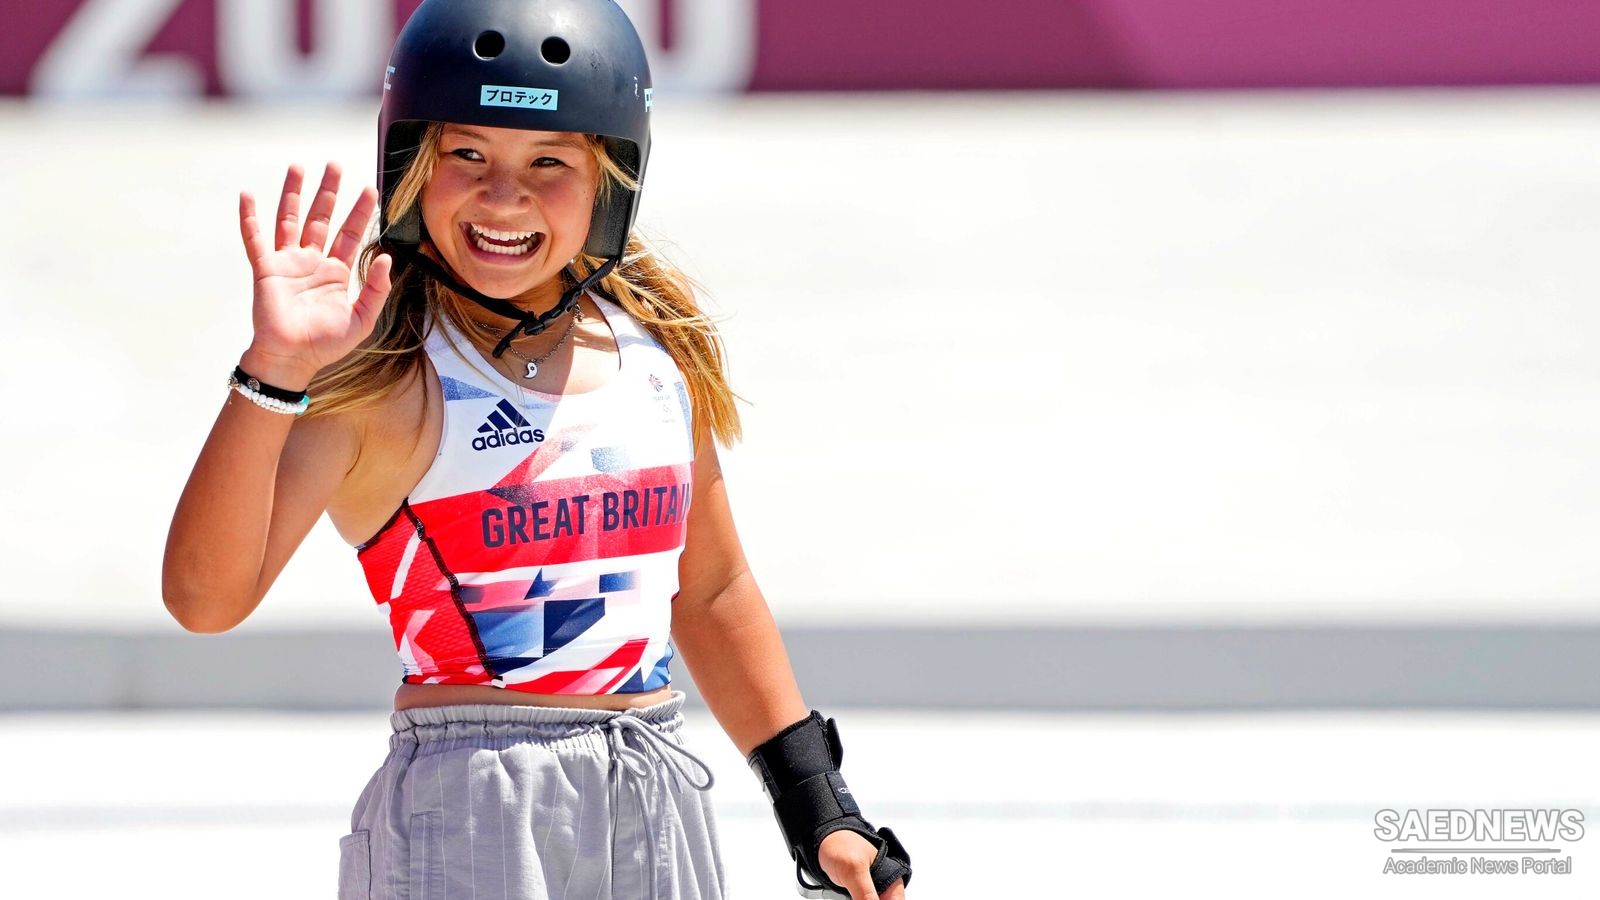 Tokyo Olympics: Sky Brown becomes GB's youngest ever medal winner with skateboard bronze at 13